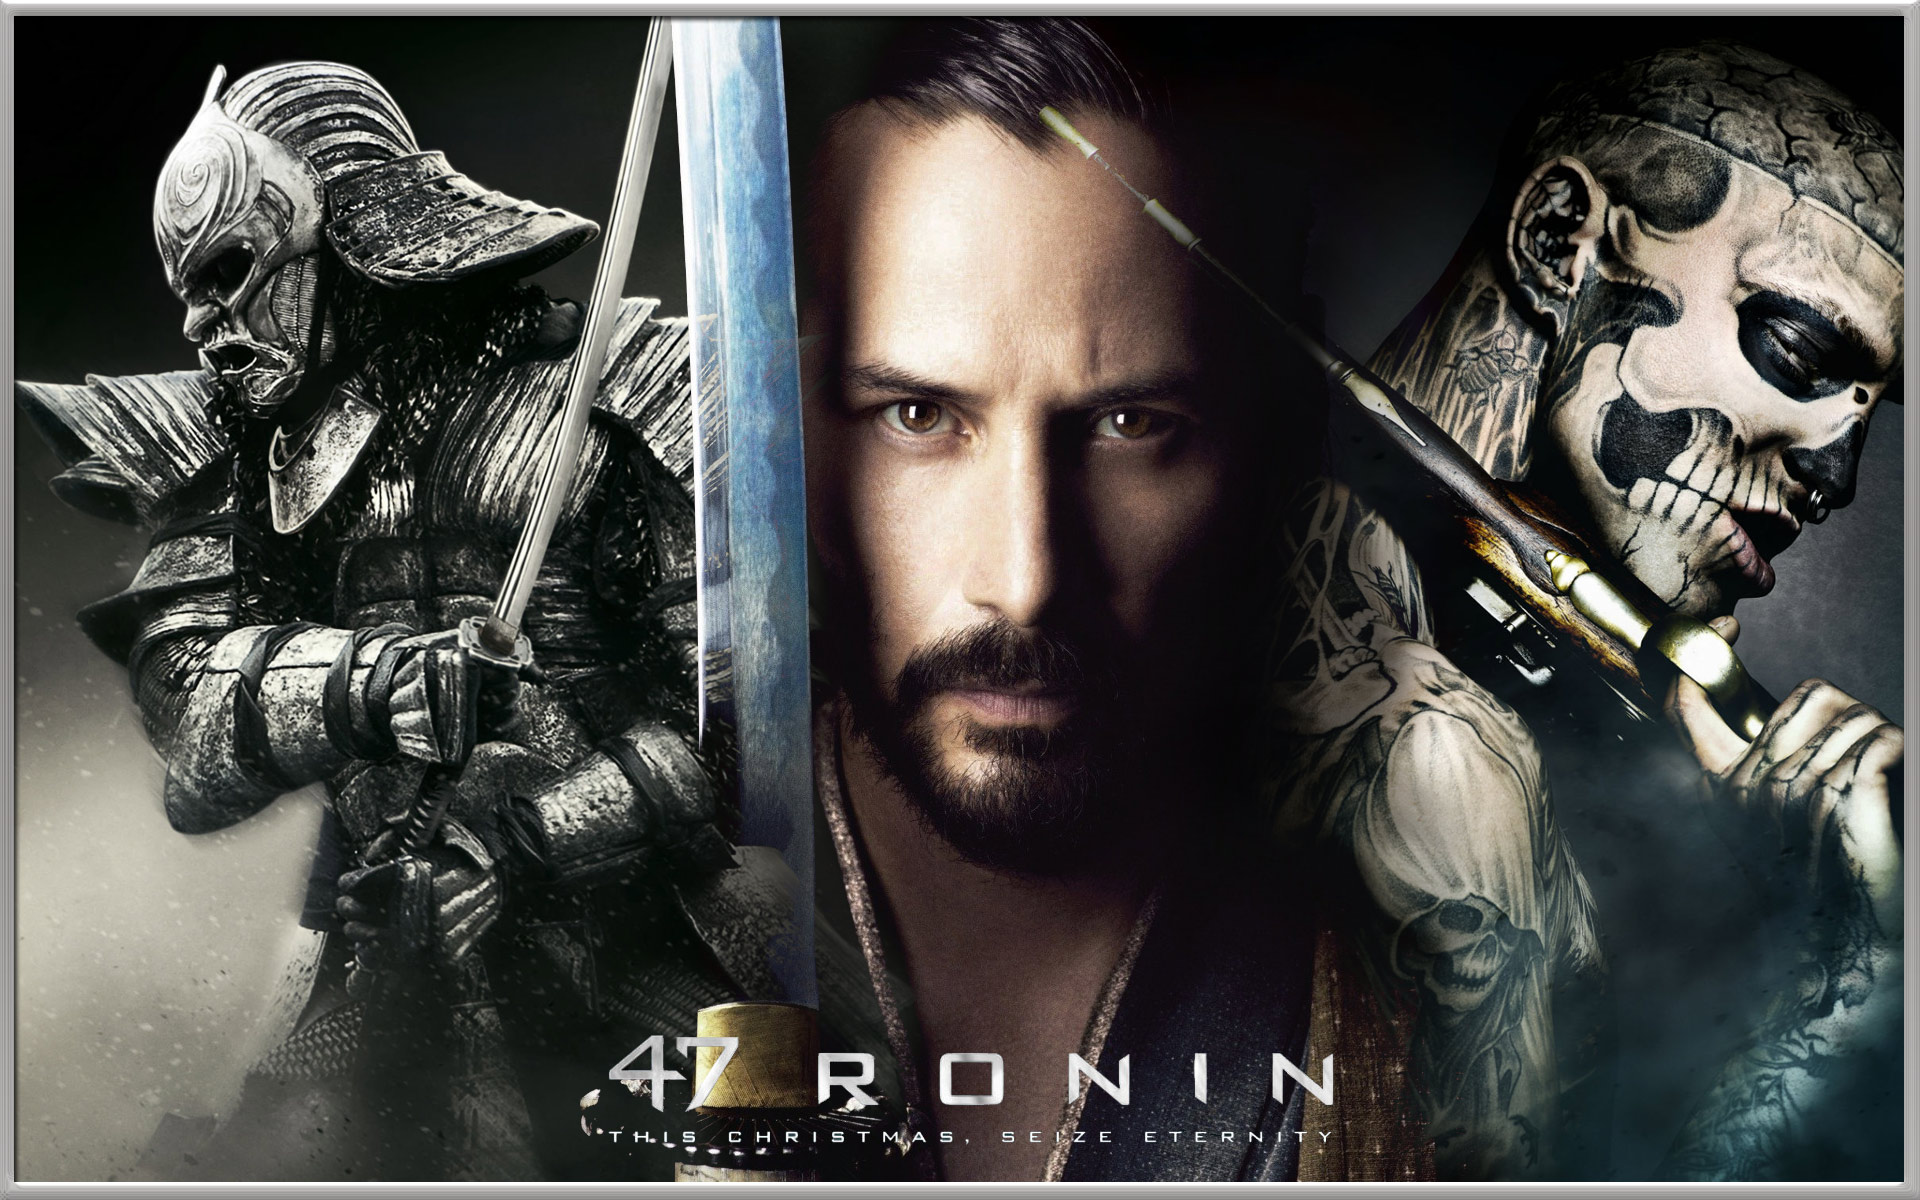 1920x1200 > 47 Ronin Wallpapers